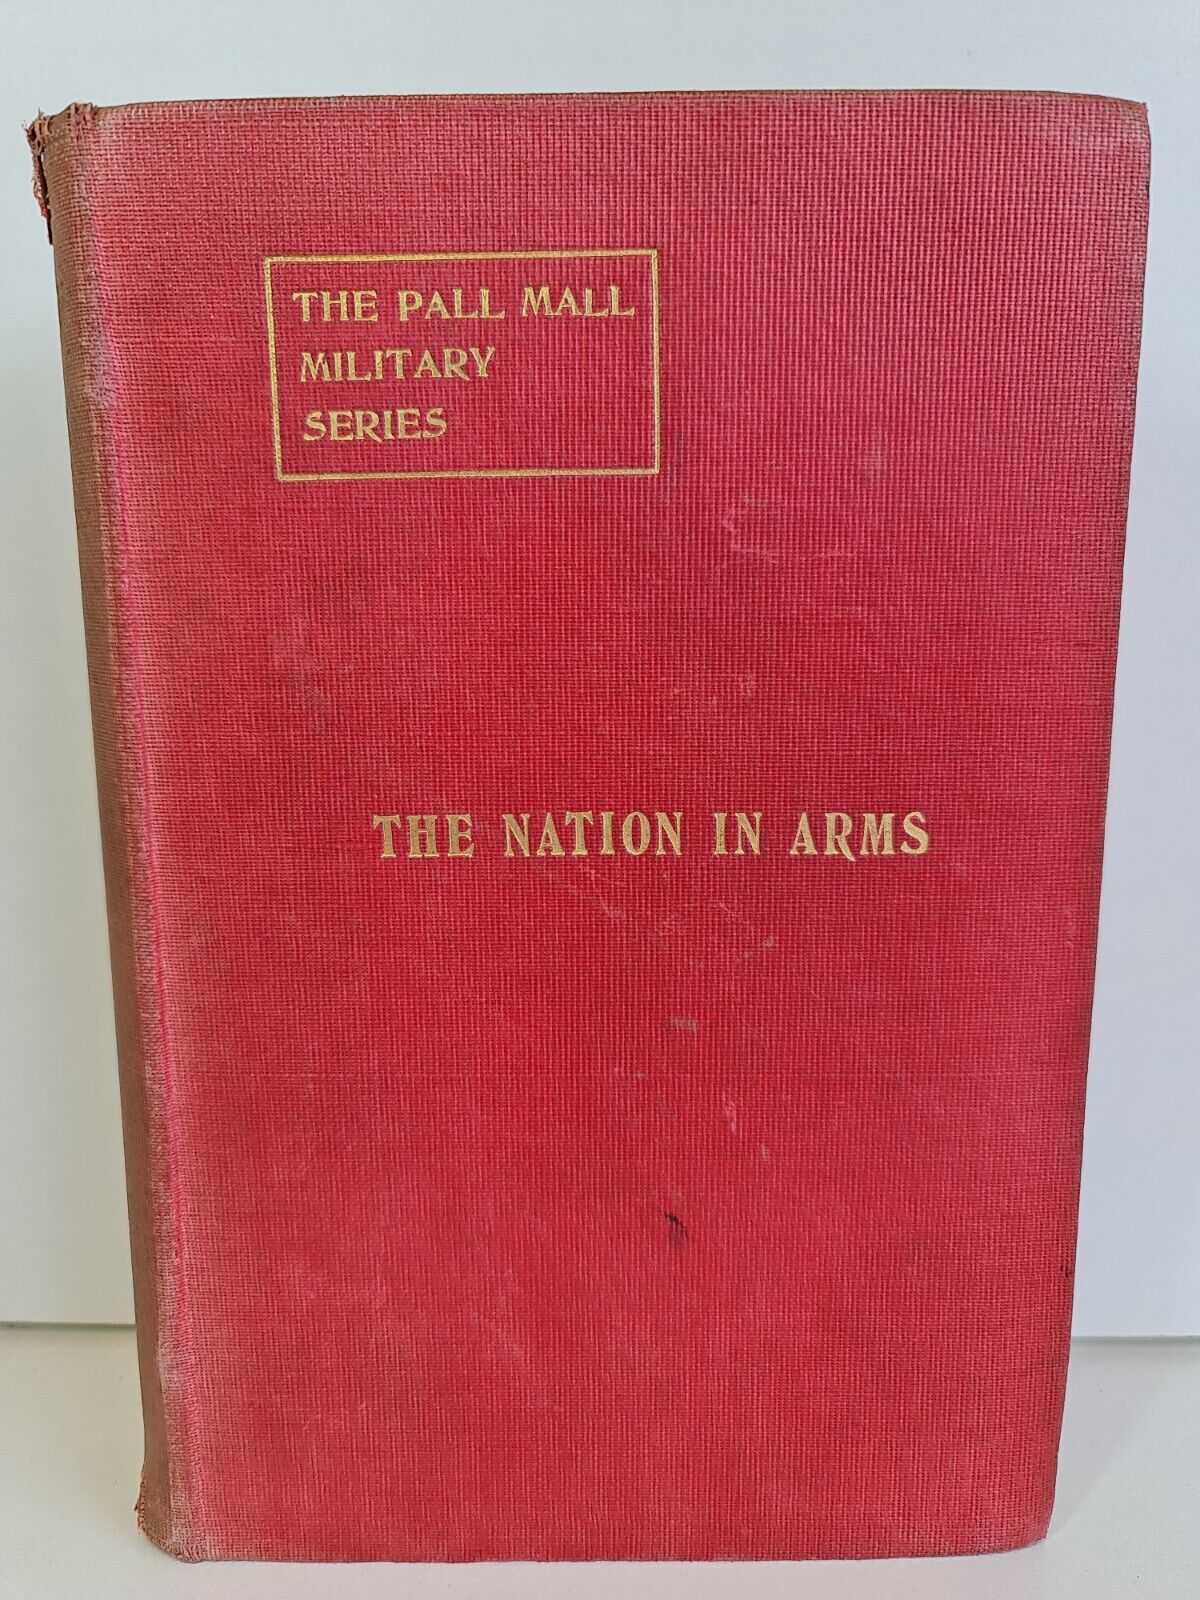 The Nation in Arms by Colmar Goltz (1913)